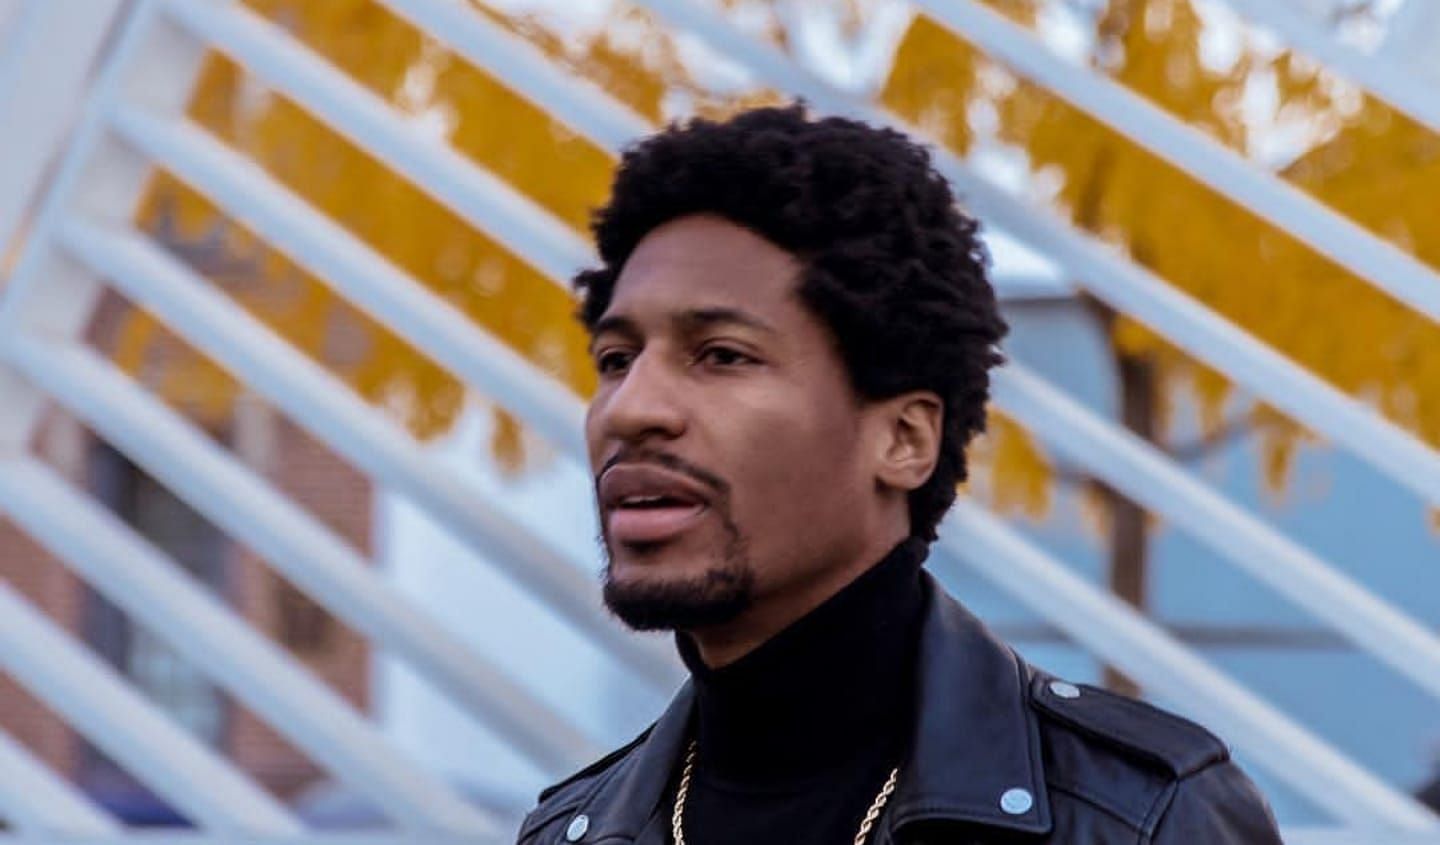 Why did Jon Batiste leave the Late Show?